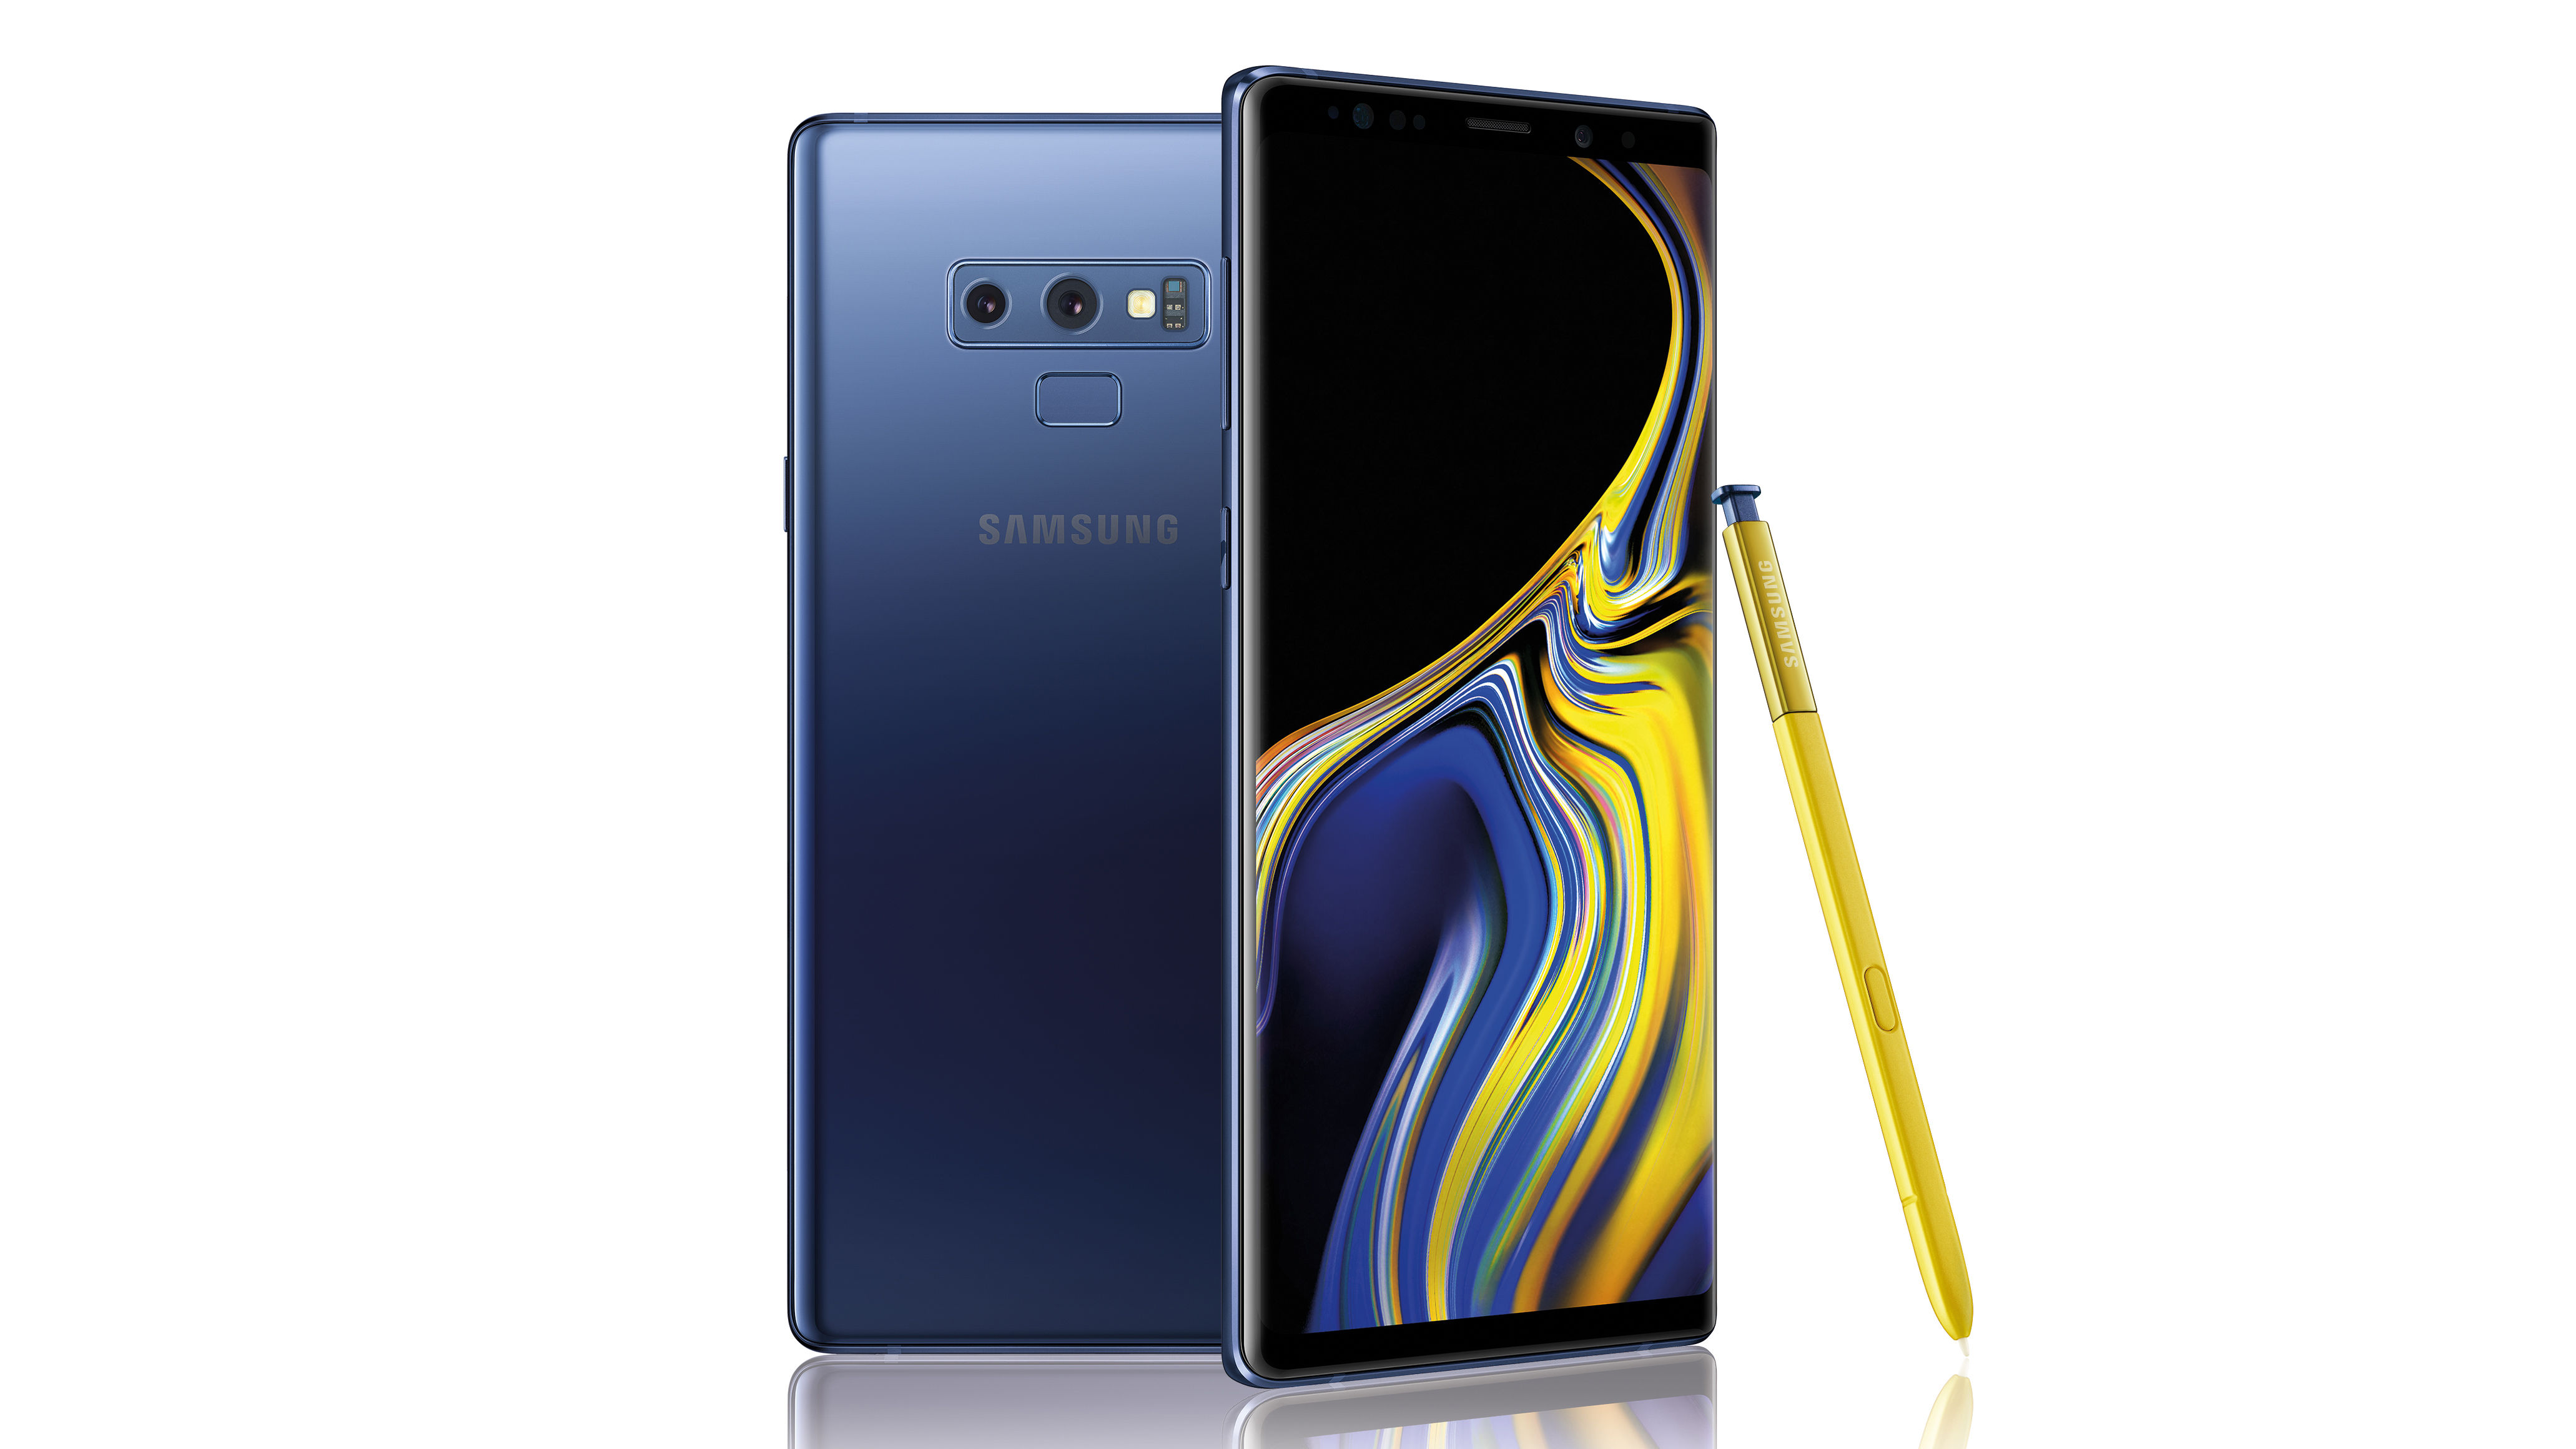 Samsung ready to deploy Android 10 on Galaxy Note9